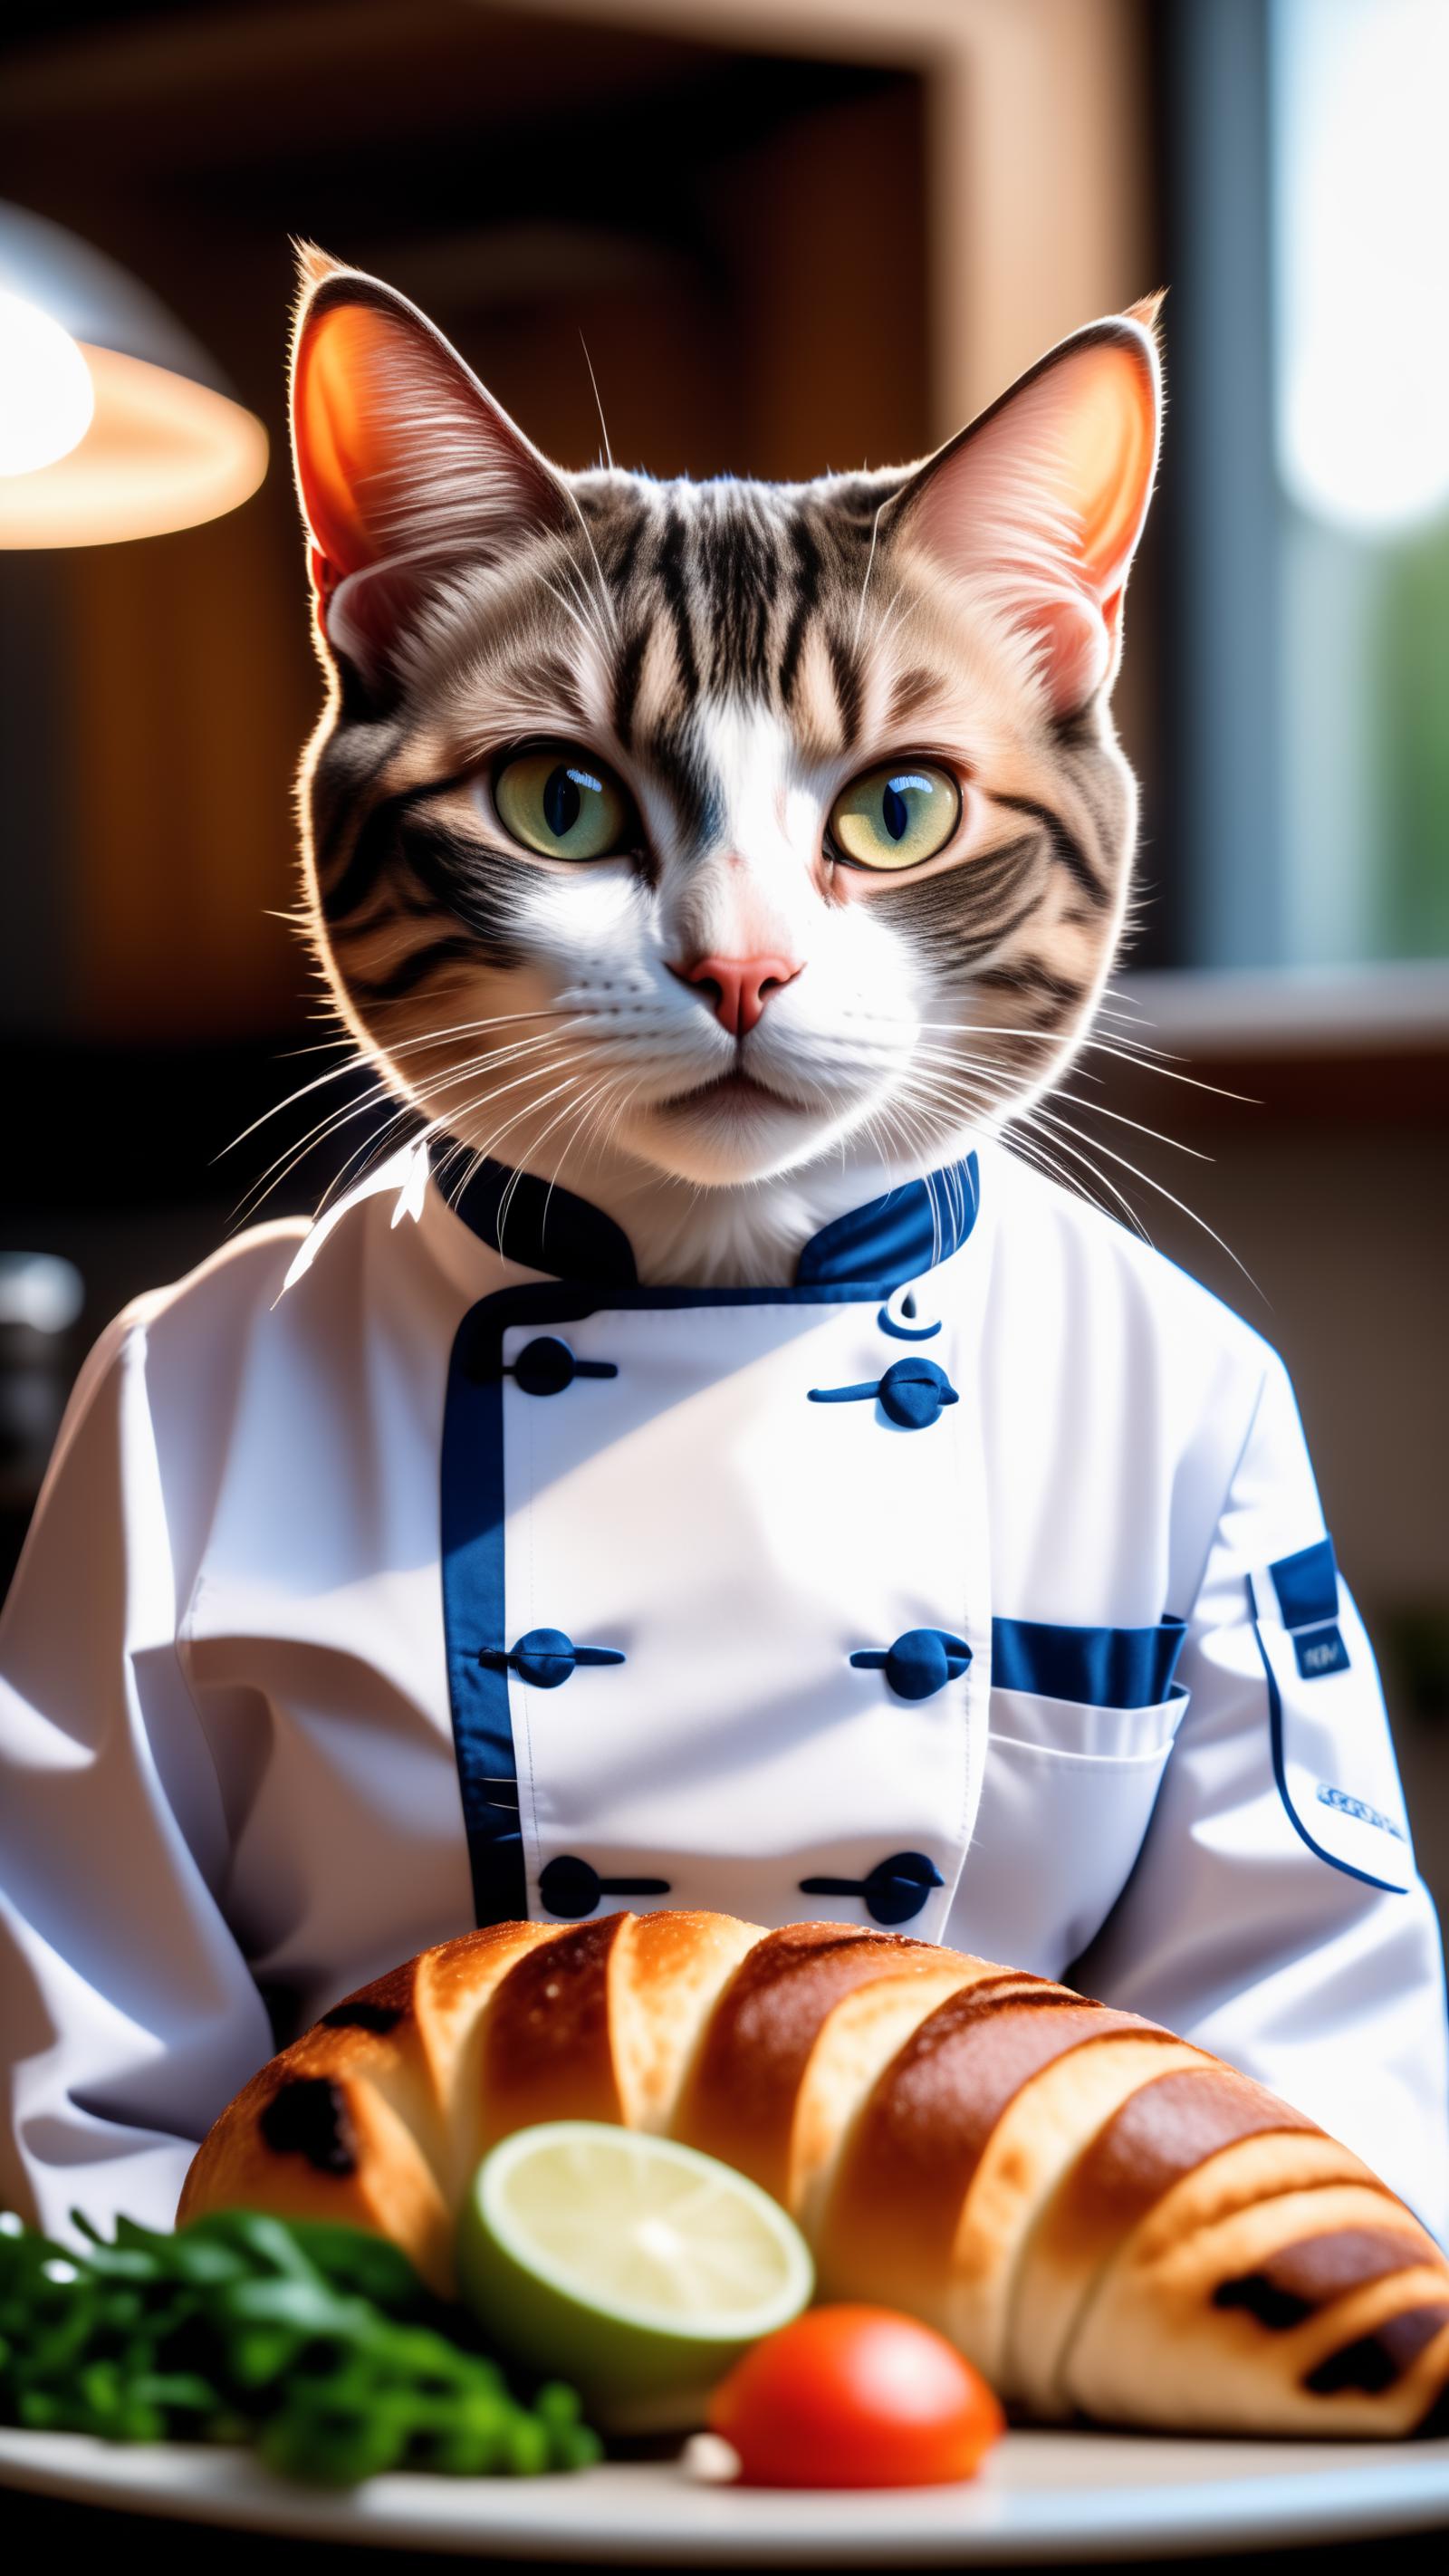 A cat wearing a chef's outfit and holding a loaf of bread.